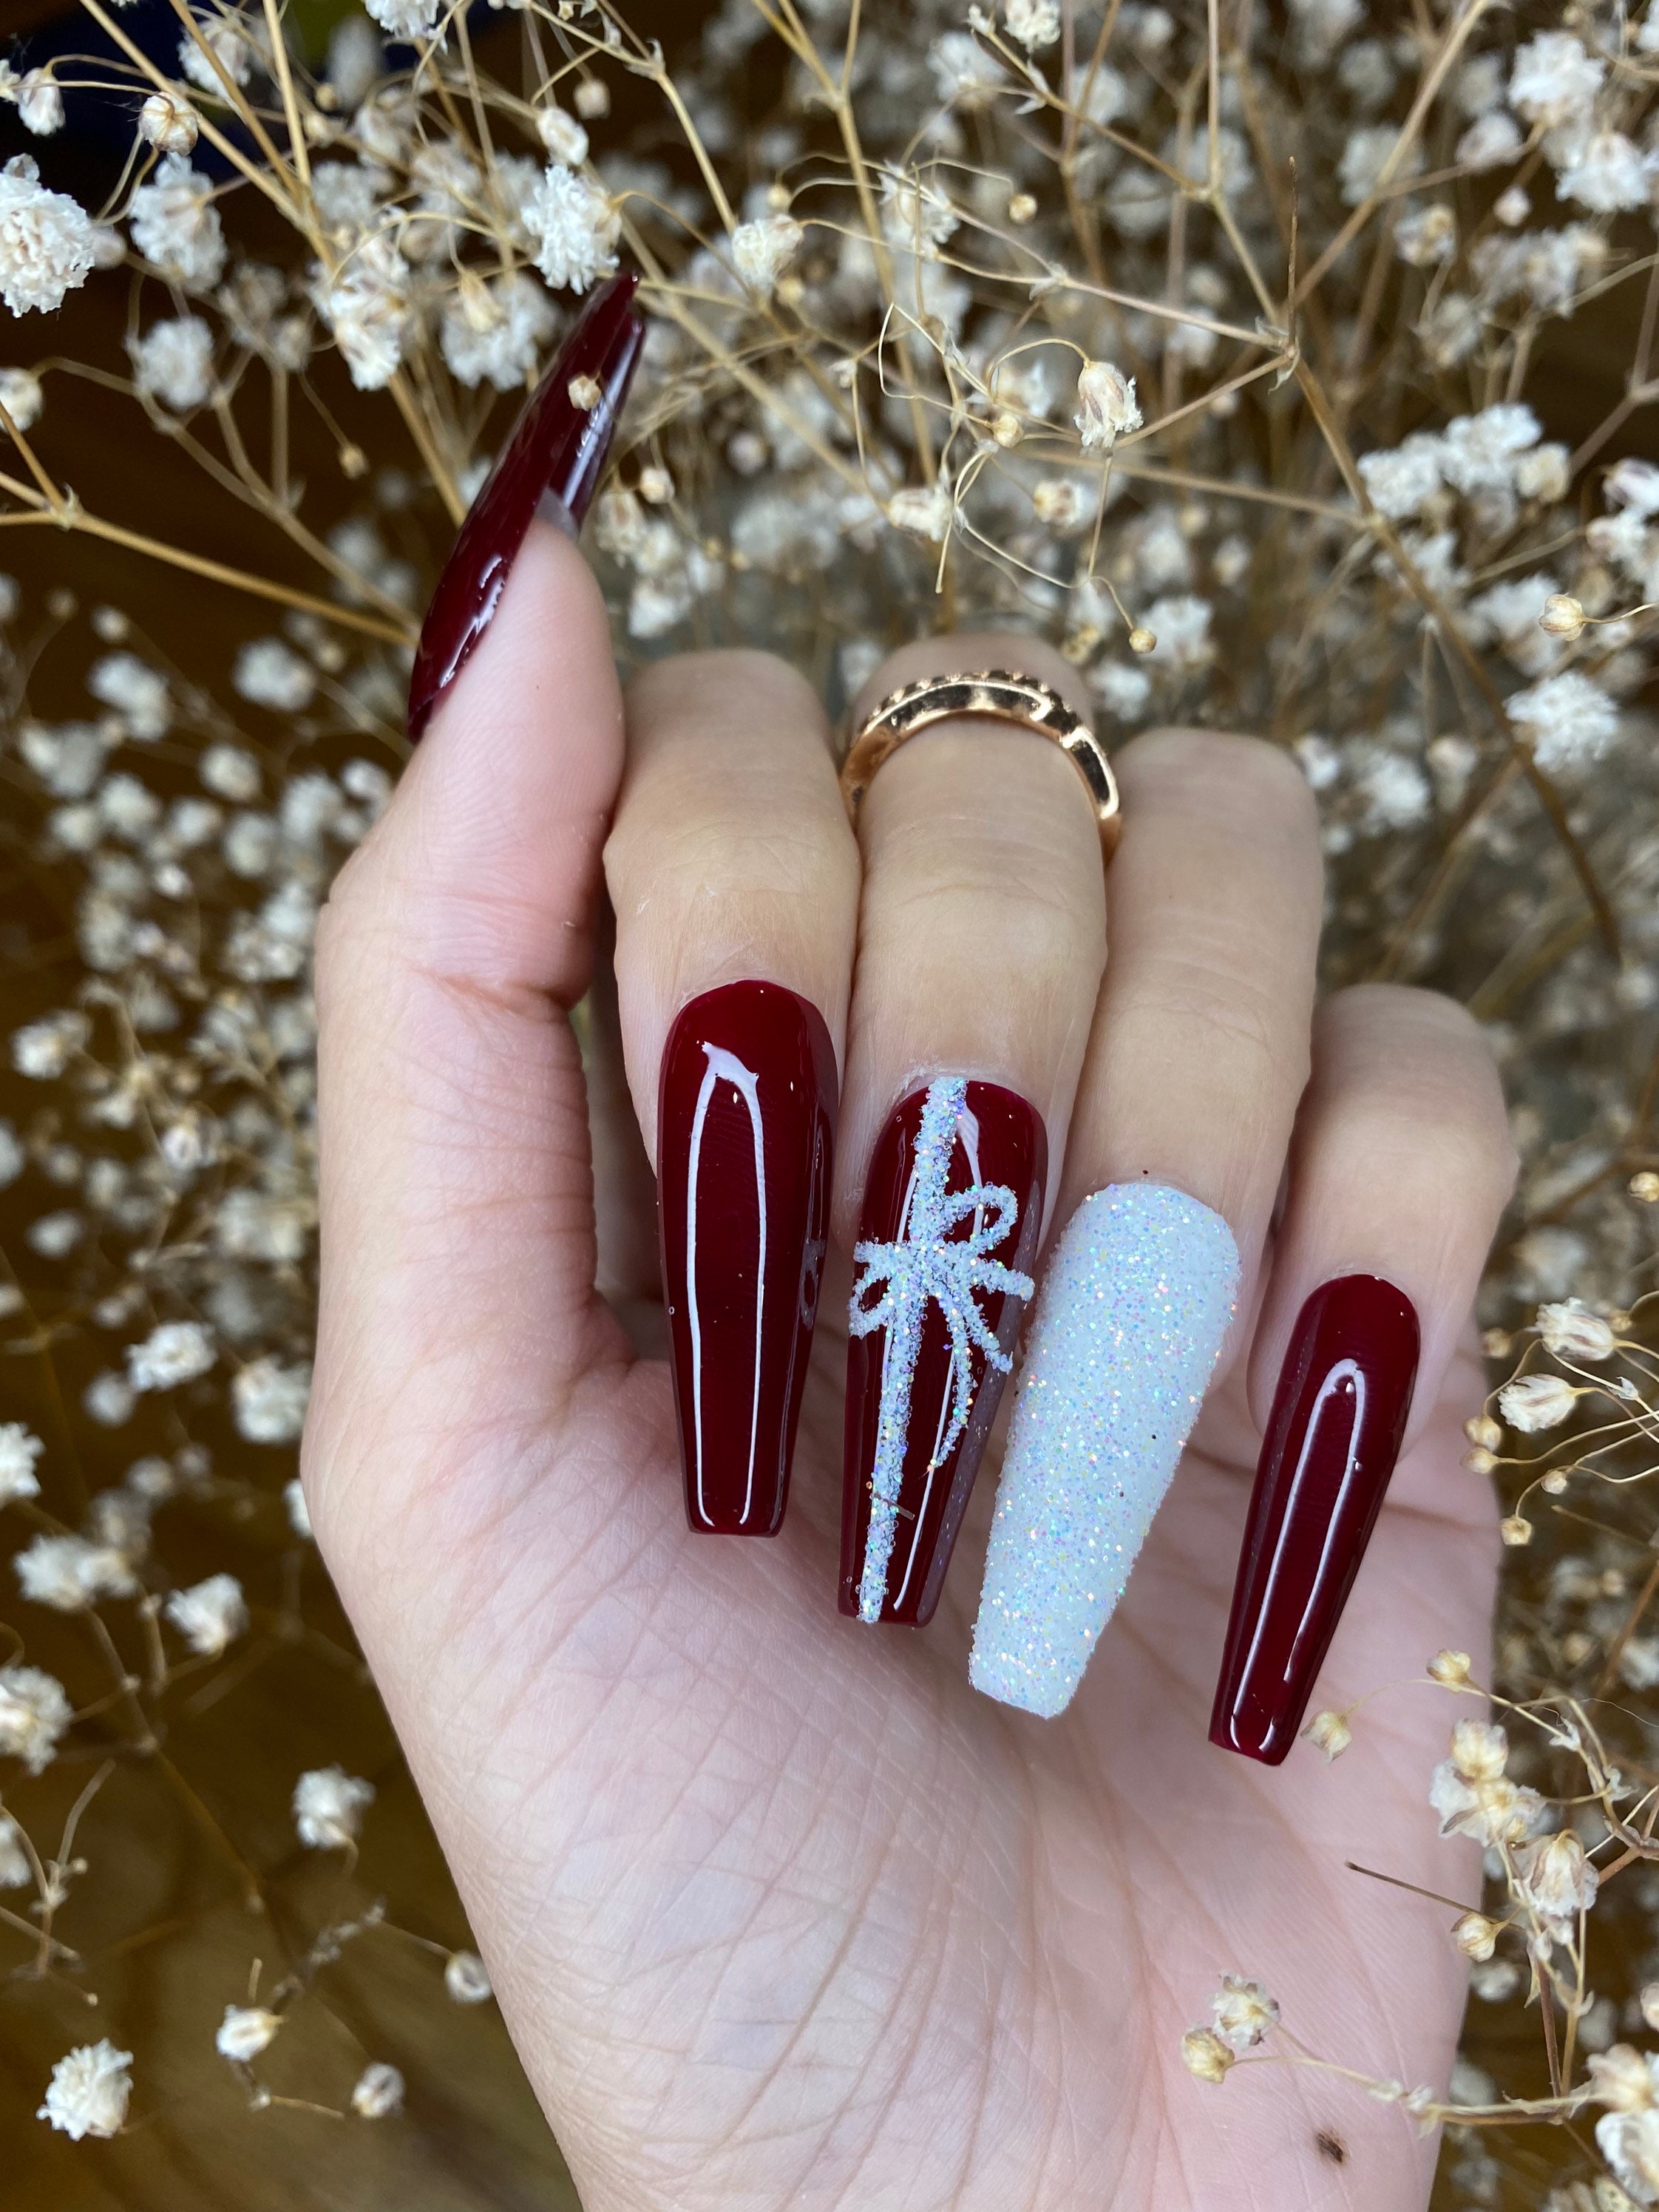 Bradford Nails - Christmas red nails glitter gems design in coffin shape  #christmasnails #coffinnails #rednails #naildesigns #glitternails | Facebook